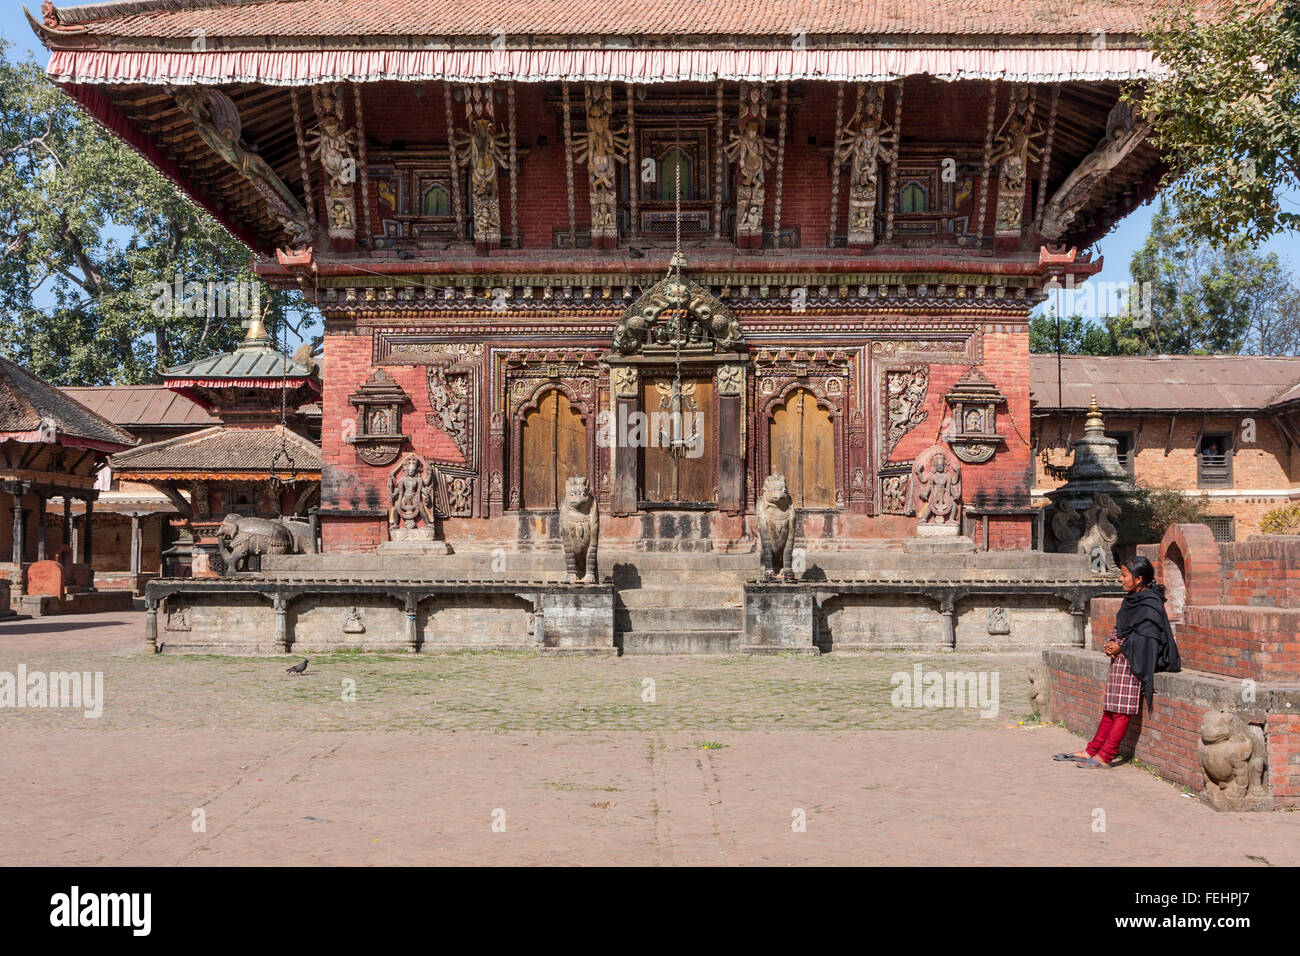 Nepal, Changu Narayan Temple, before April 2015 earthquake.  Temple was heavily damaged in the earthquake, but will be repaired. Stock Photo